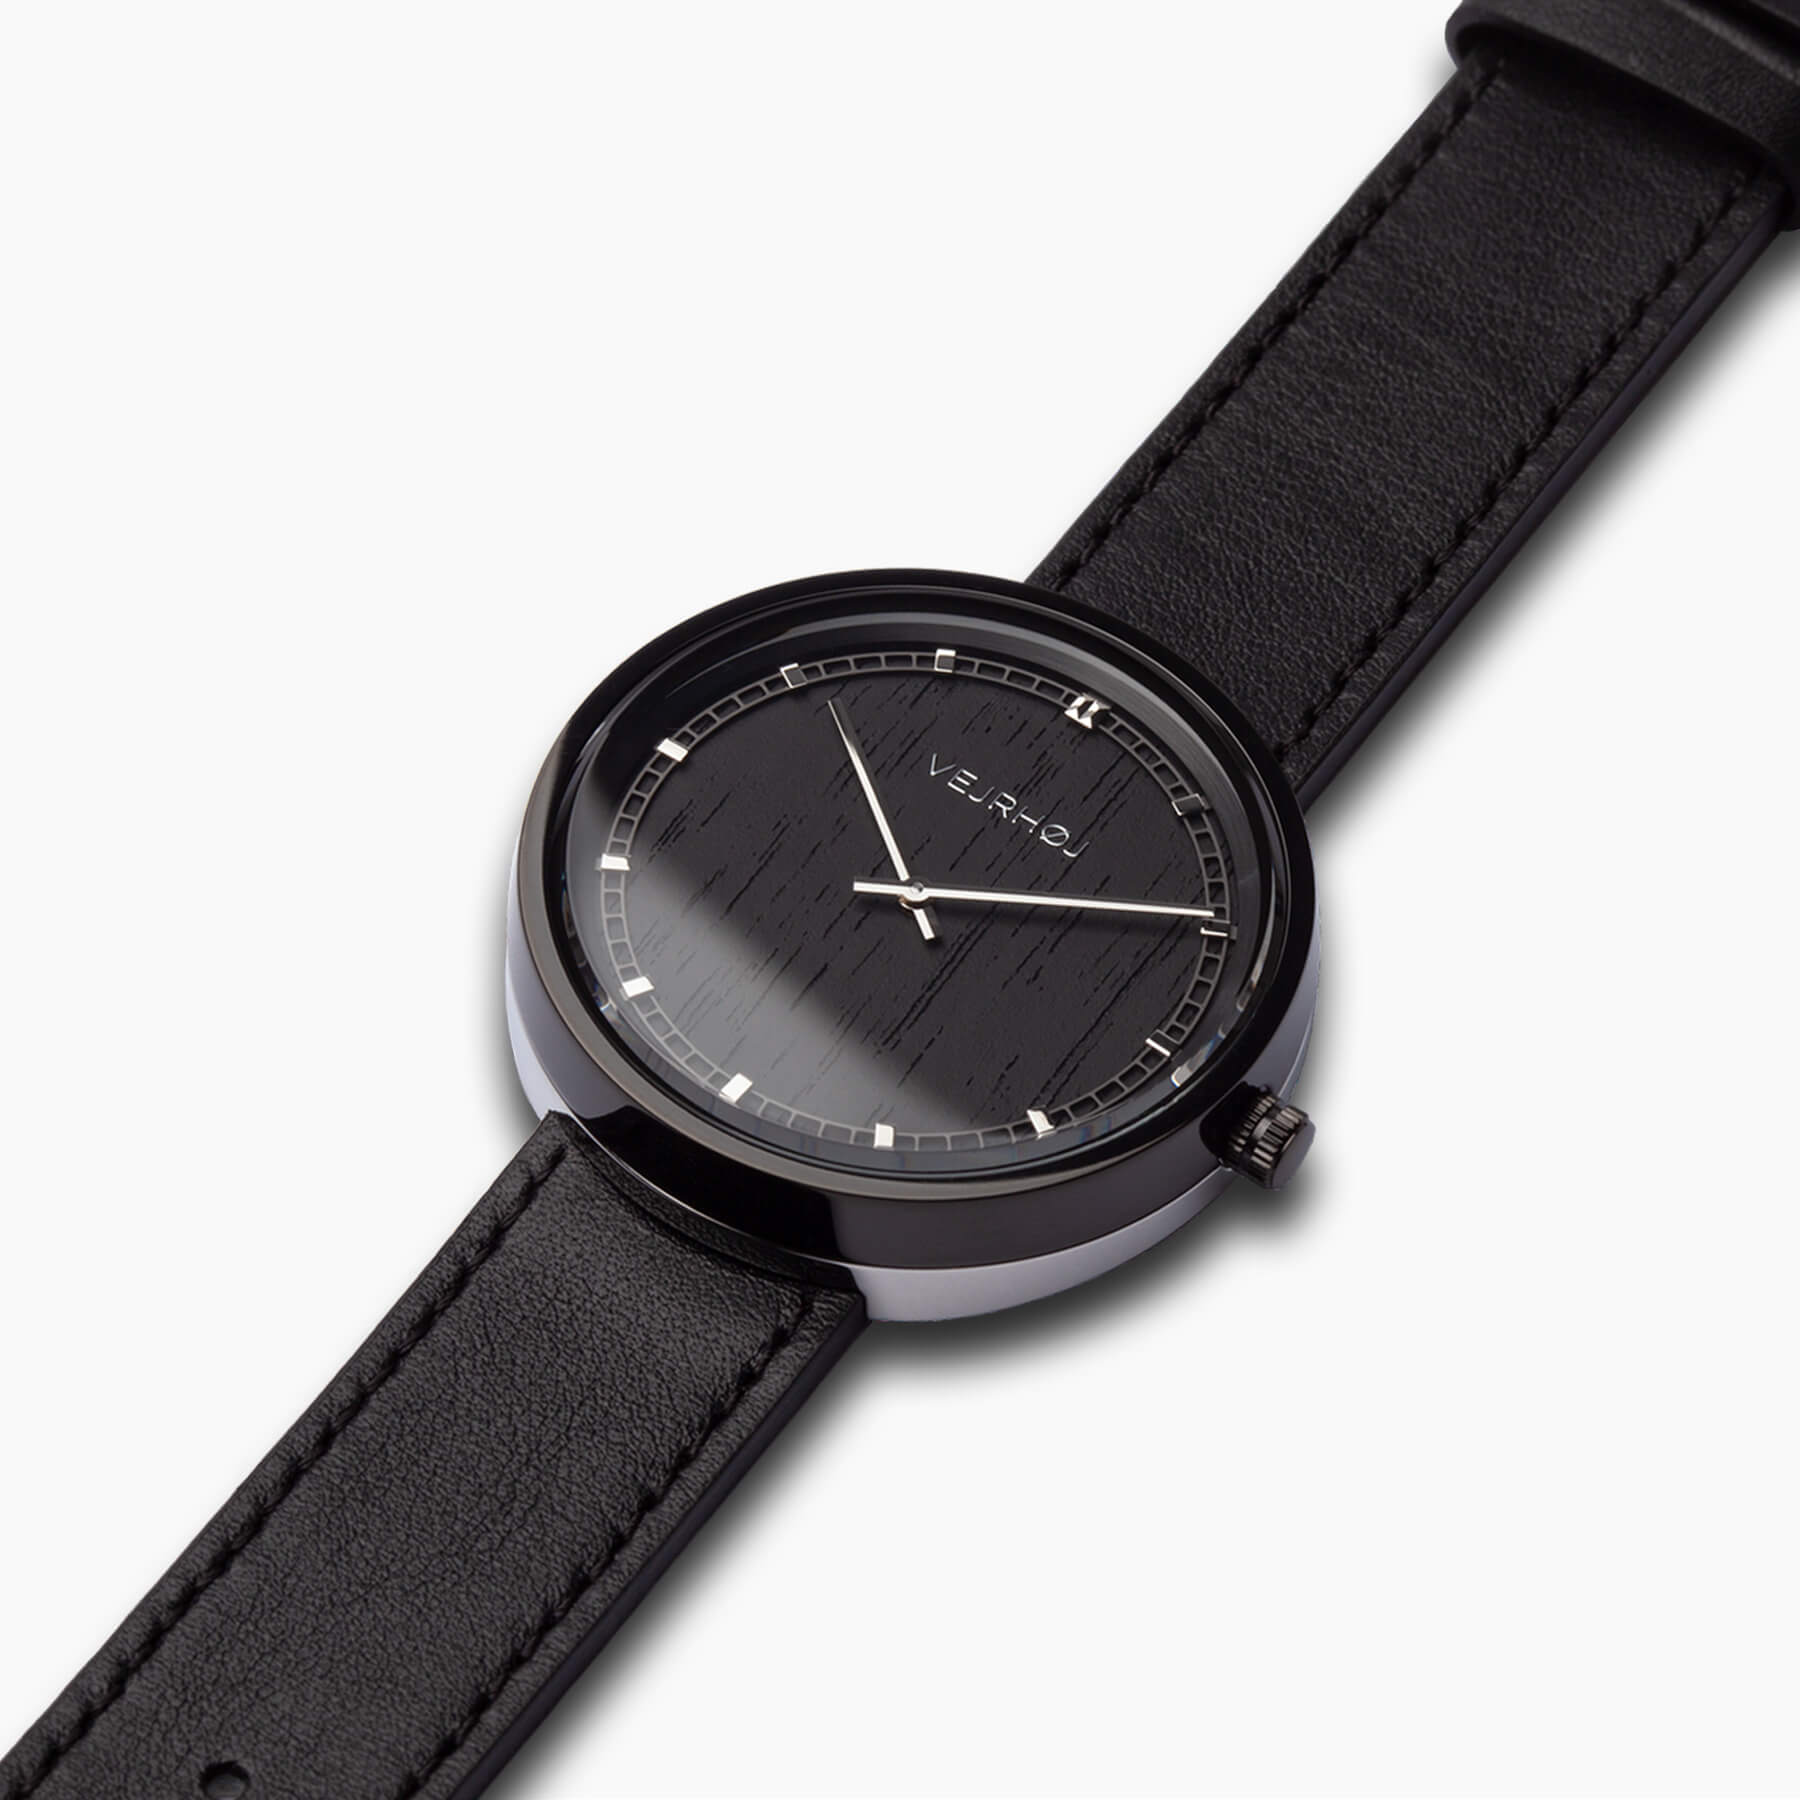 VEJRHØJ men's wooden watch with black dial and silver hands